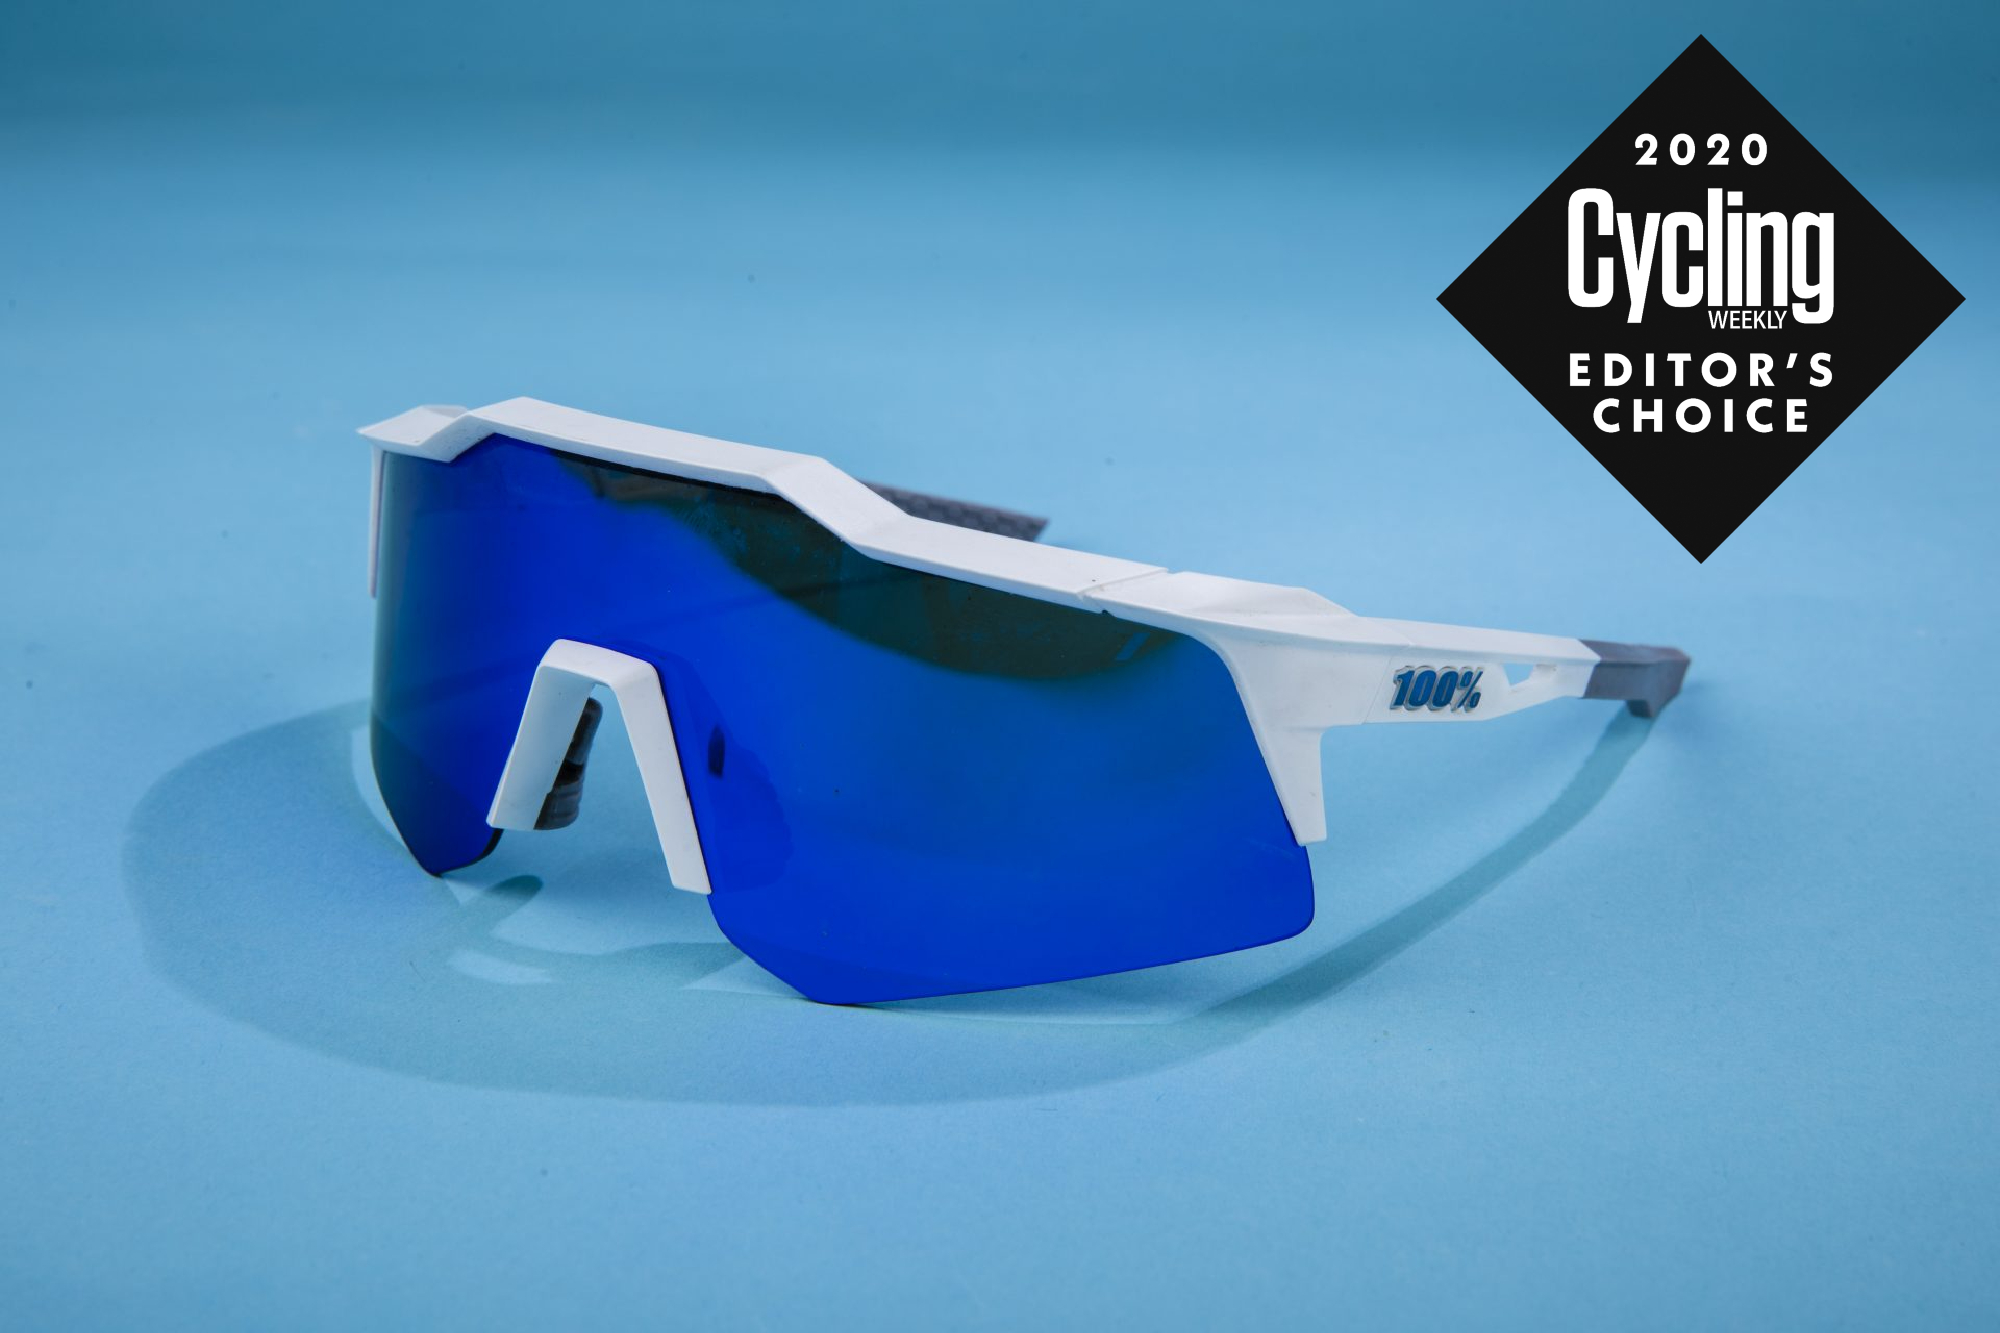 100% Speedcraft XS cycling glasses review